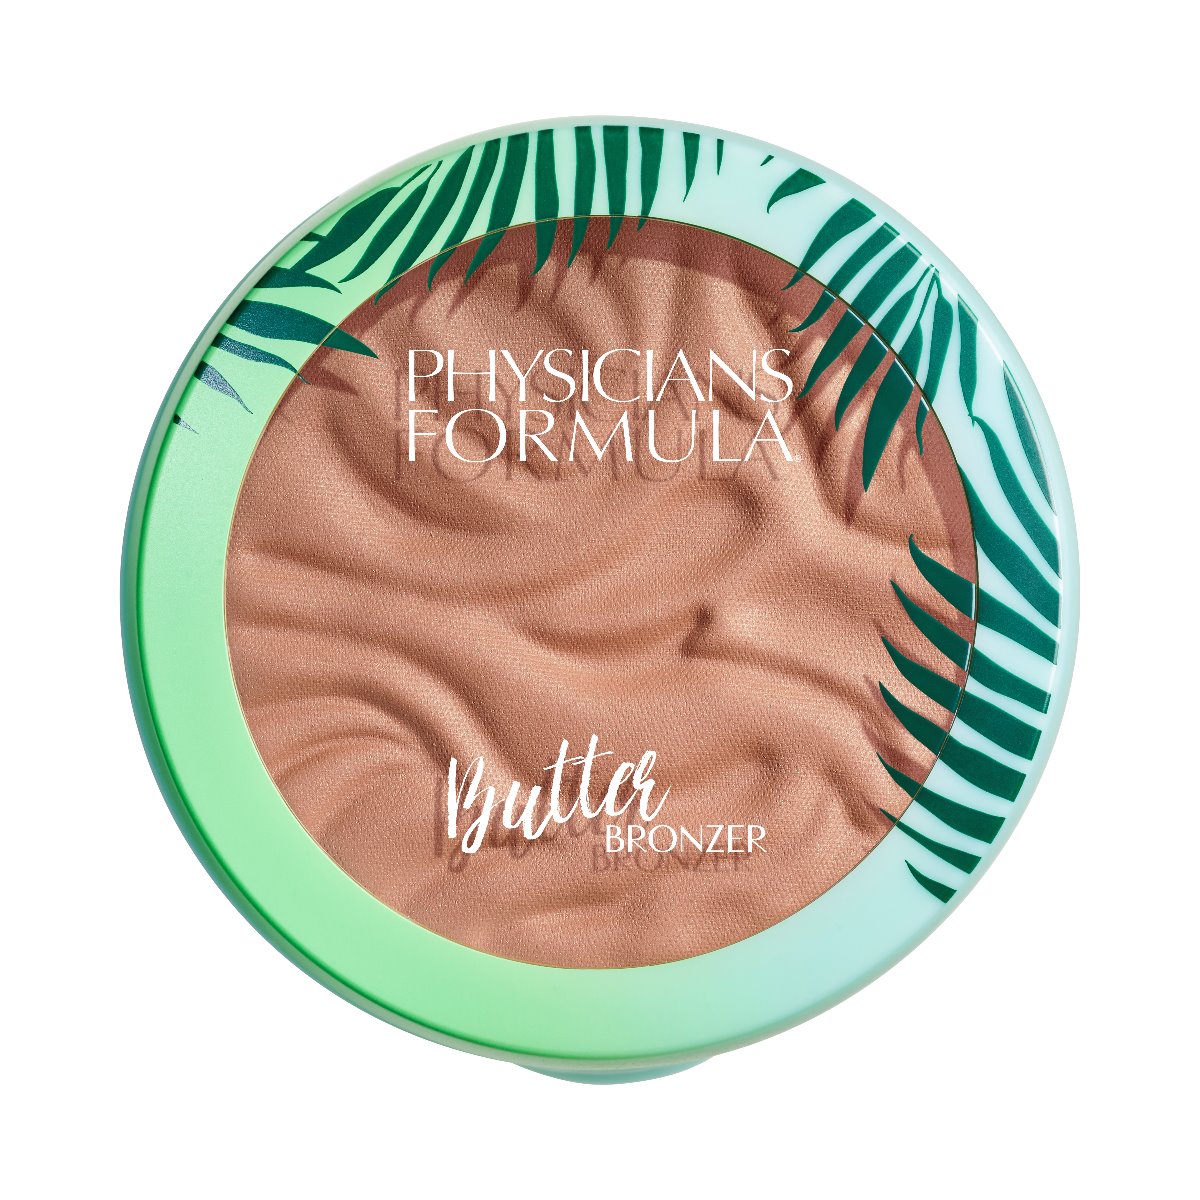 Chanel Les Beiges Cream Bronzer - Beauty Point Of View